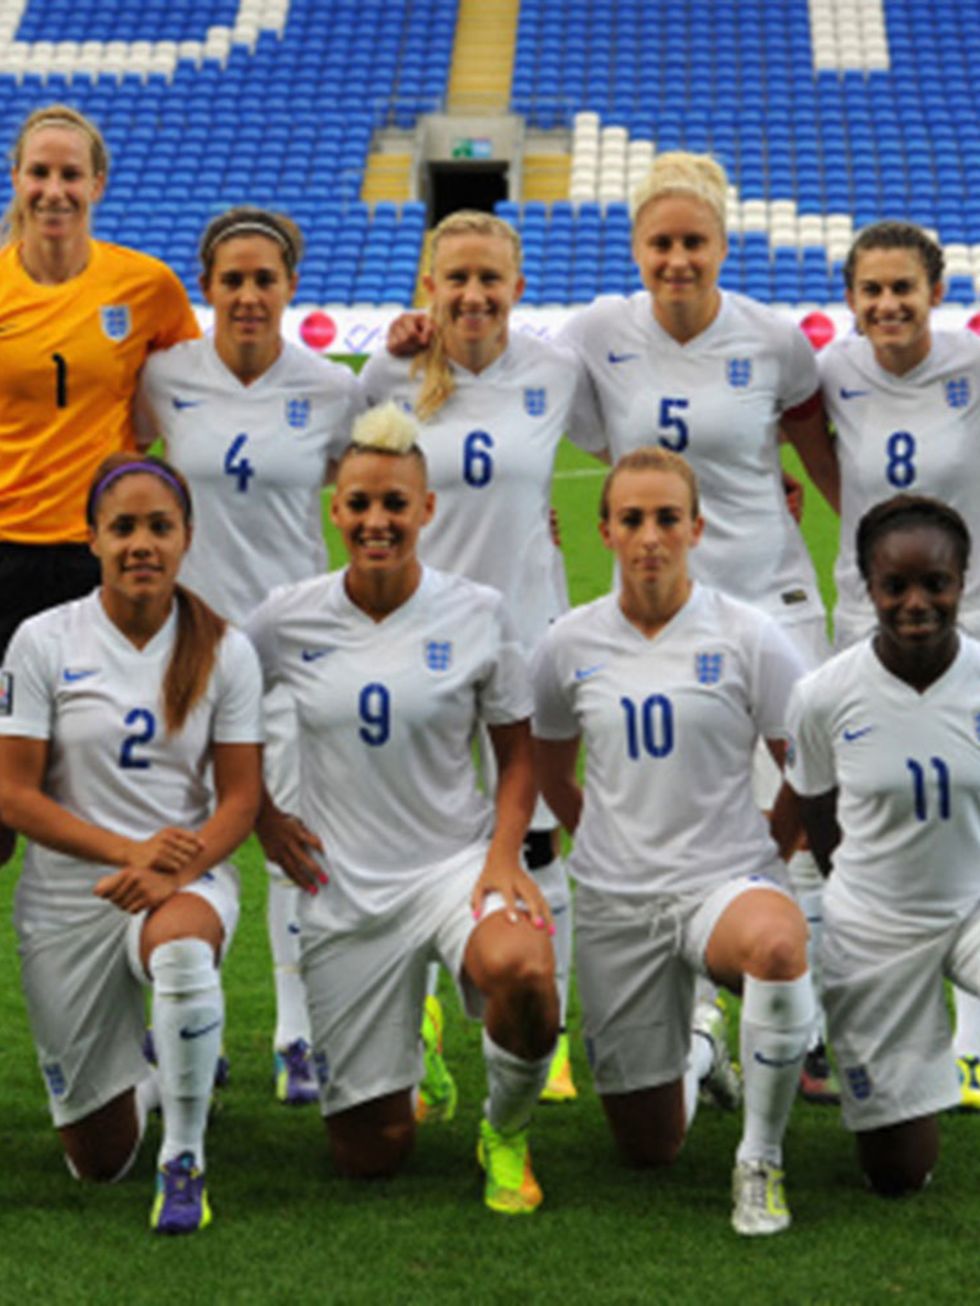 <p>Women in Football @WomeninFootball</p>

<p>Sports writer @Anna_Kessel co-founded and chairs WiF, a network of professional women working in the football industry to improve women&rsquo;s representation in the game</p>